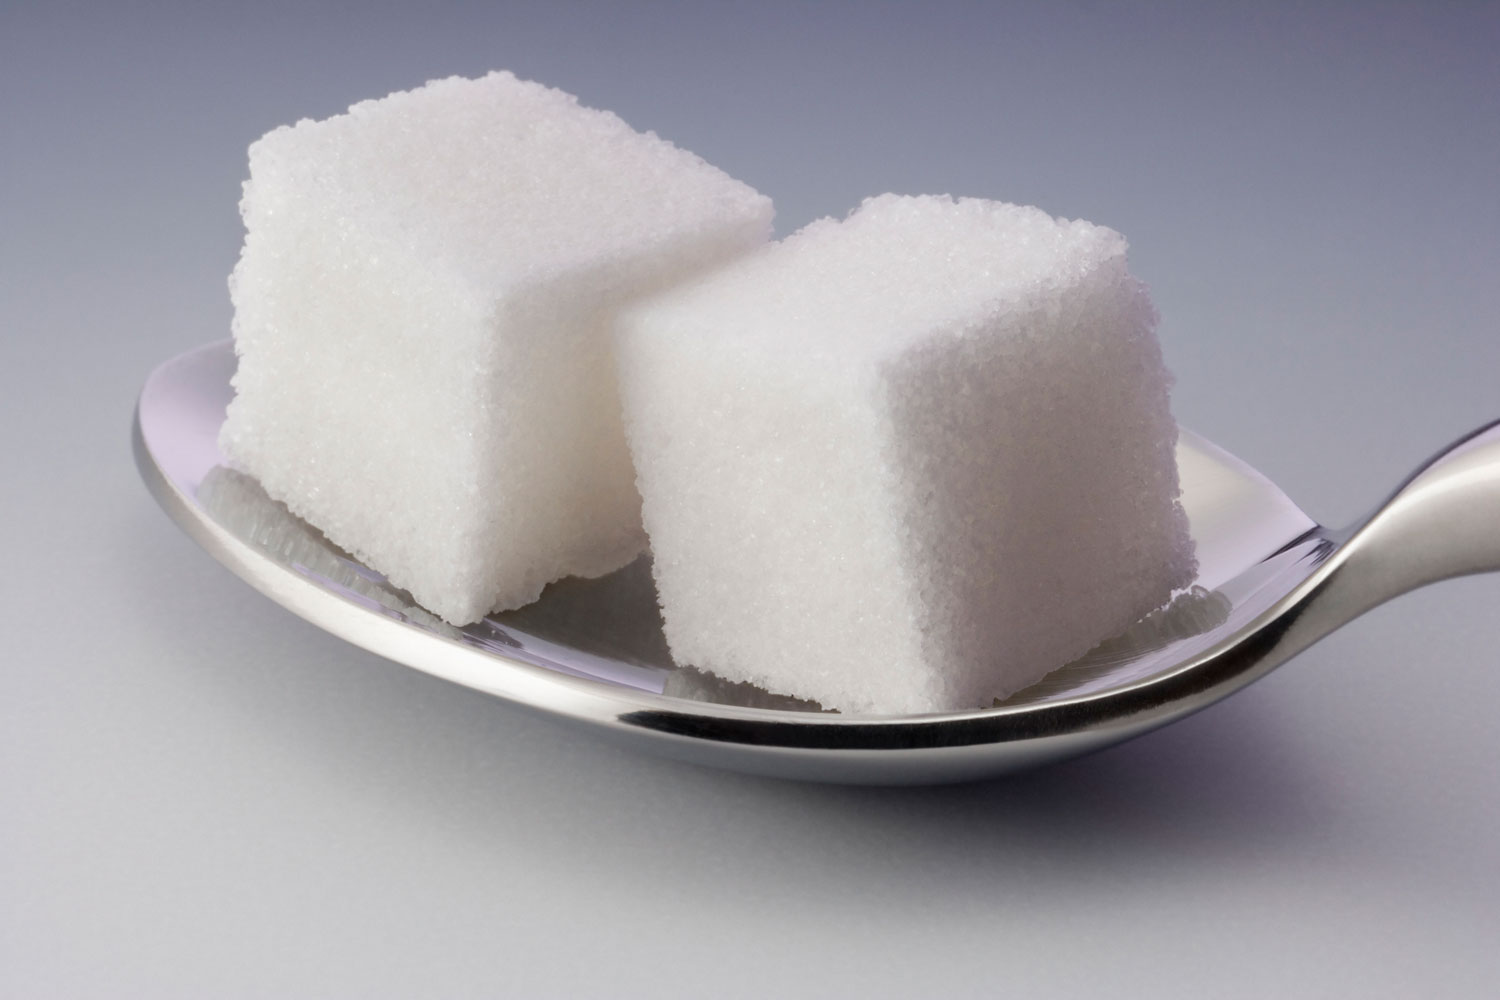 Two sugar cubes on spoon, close-up (still life)